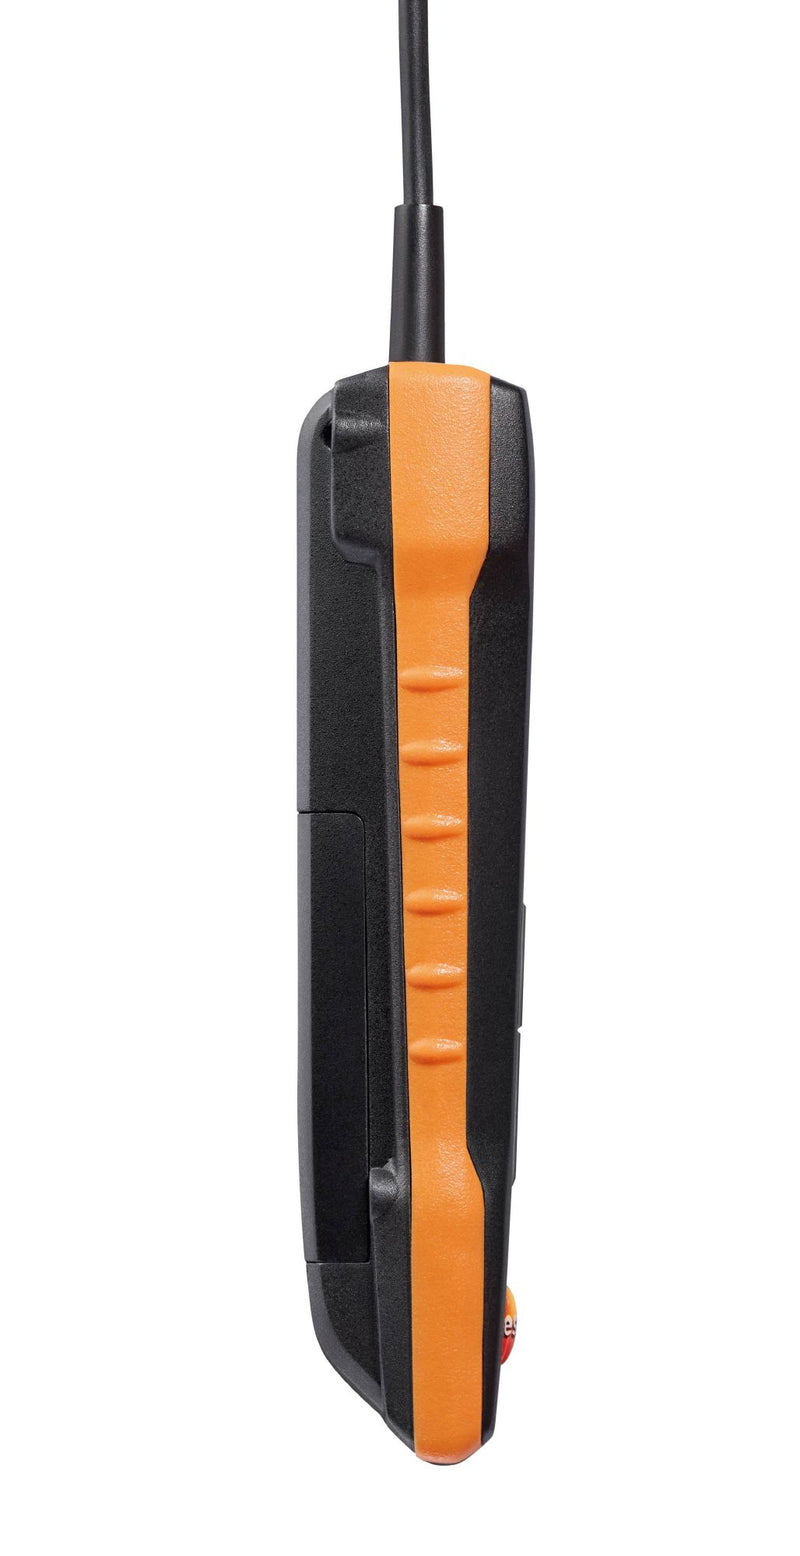 Testo 545 -  Digital Lux meter with App connection